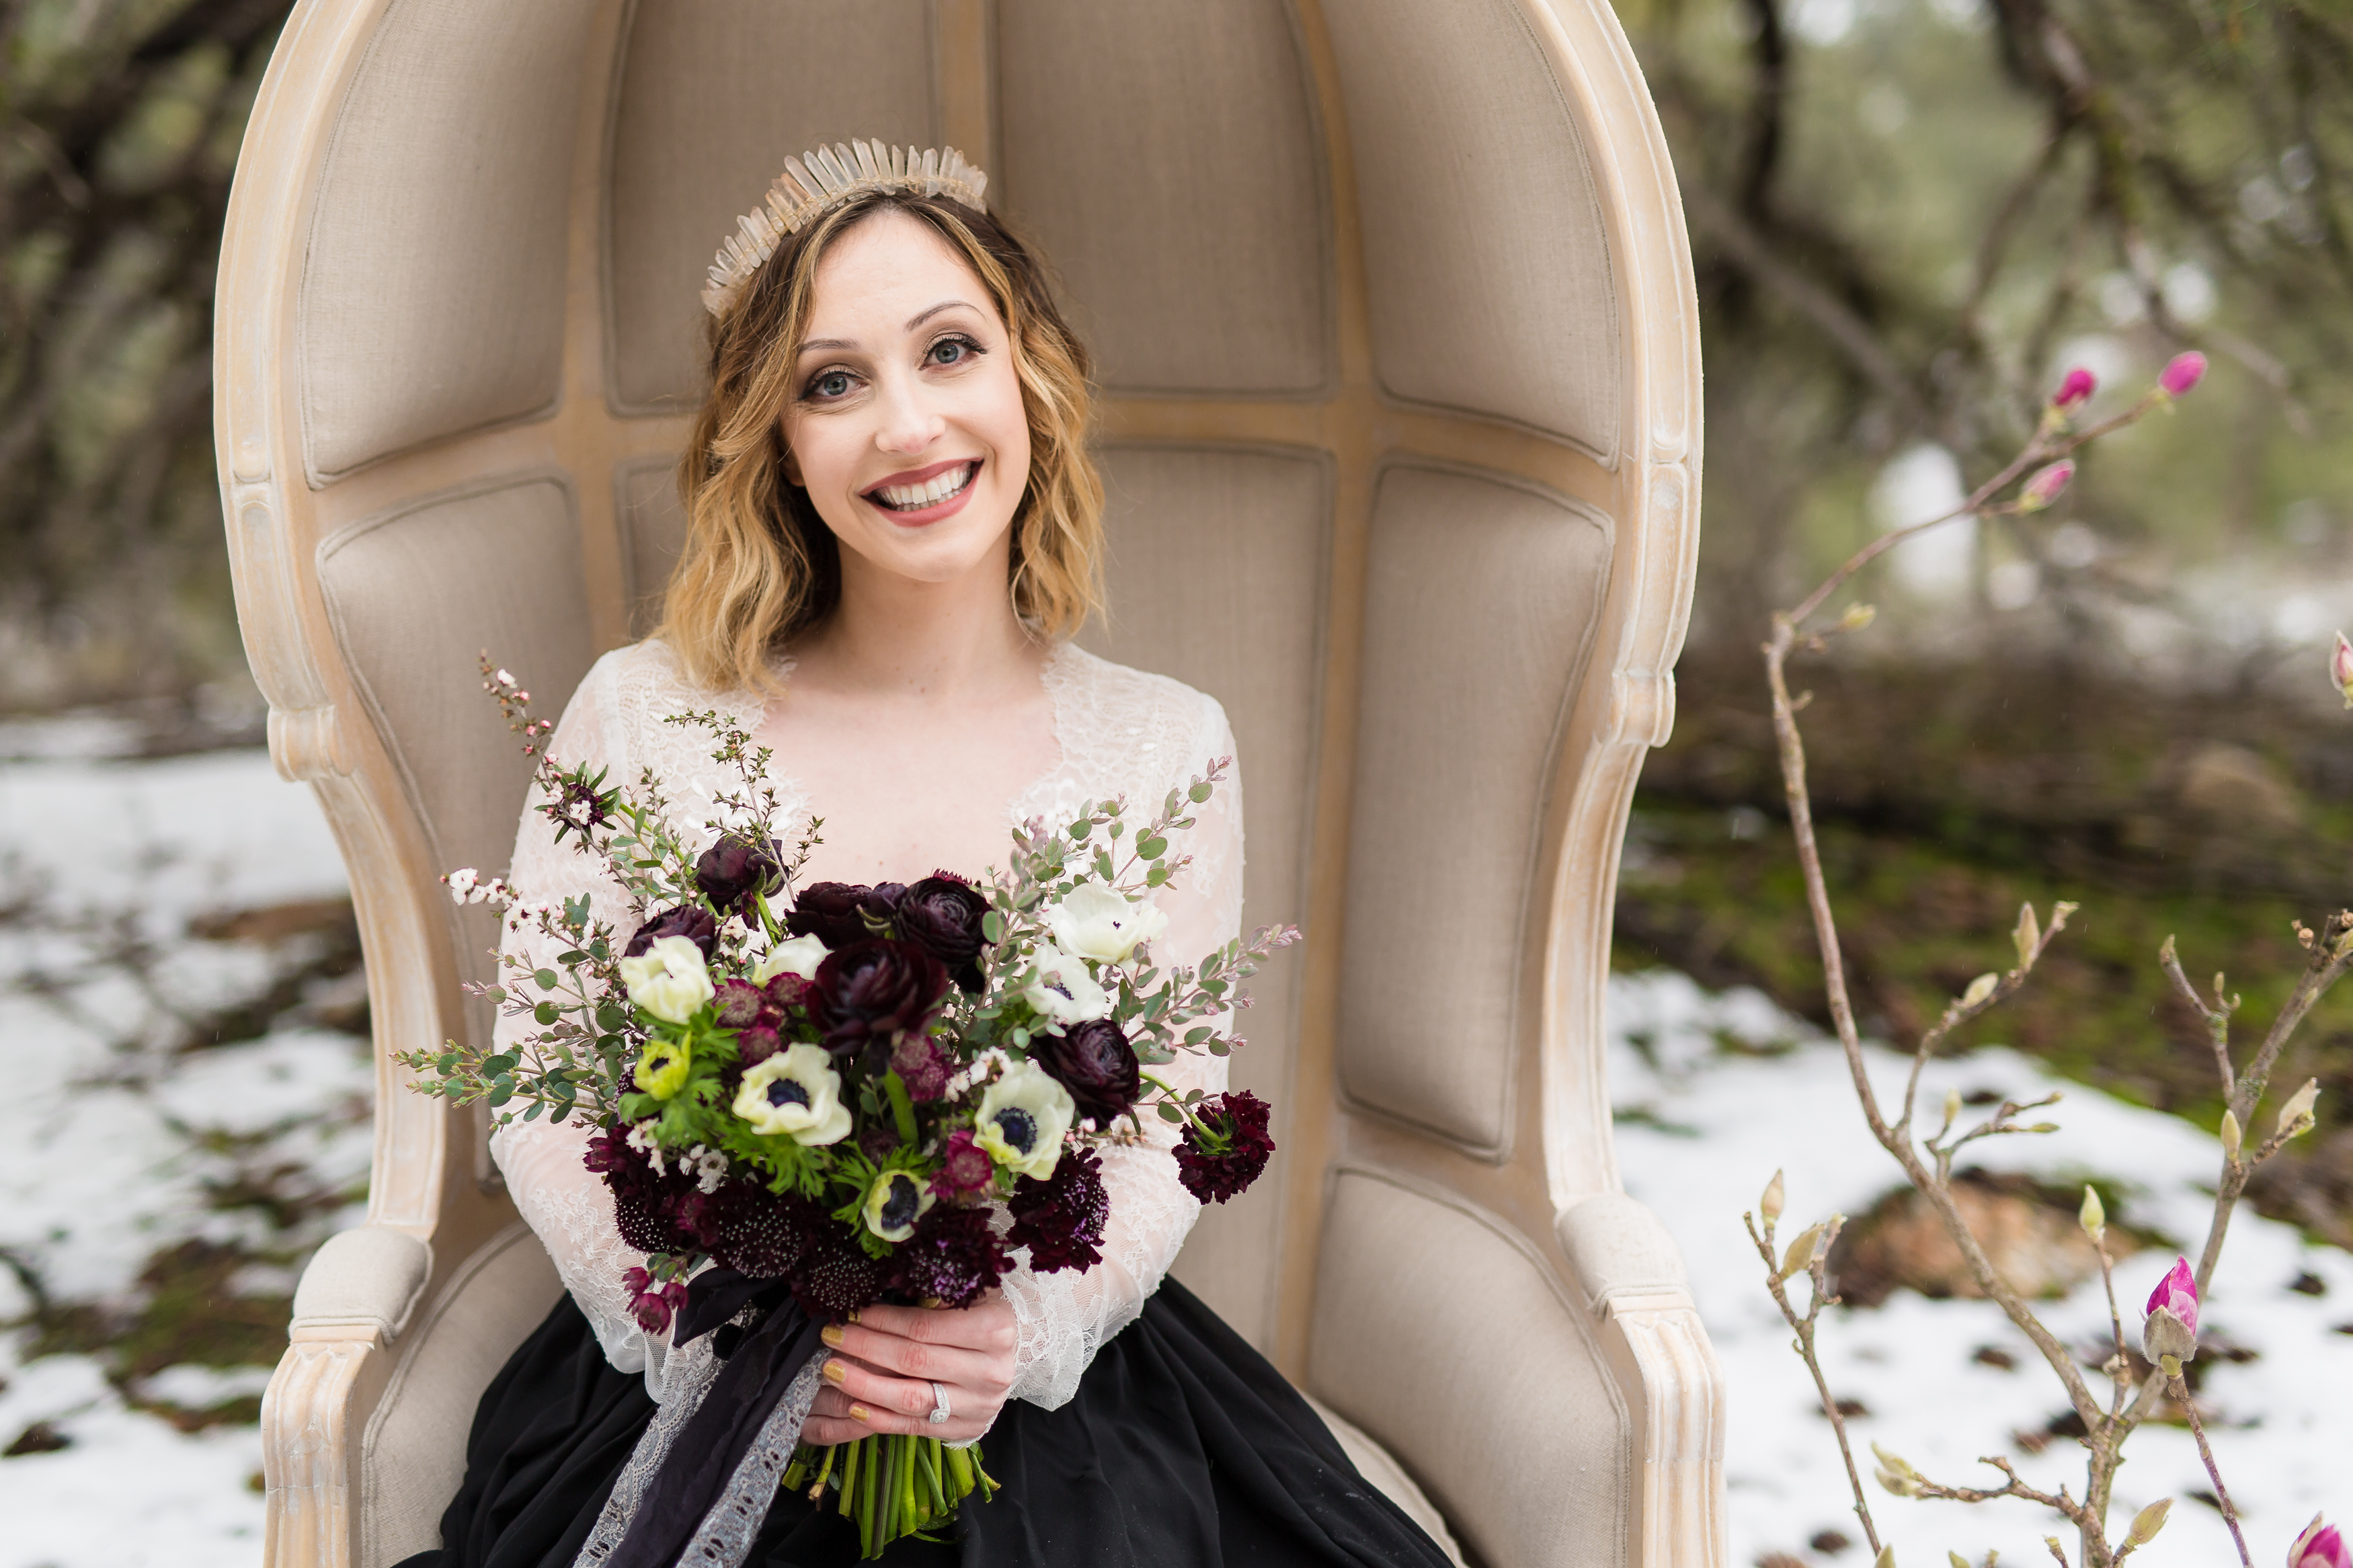 Beautiful bride holding wedding bouquet and sitting in a beige chair